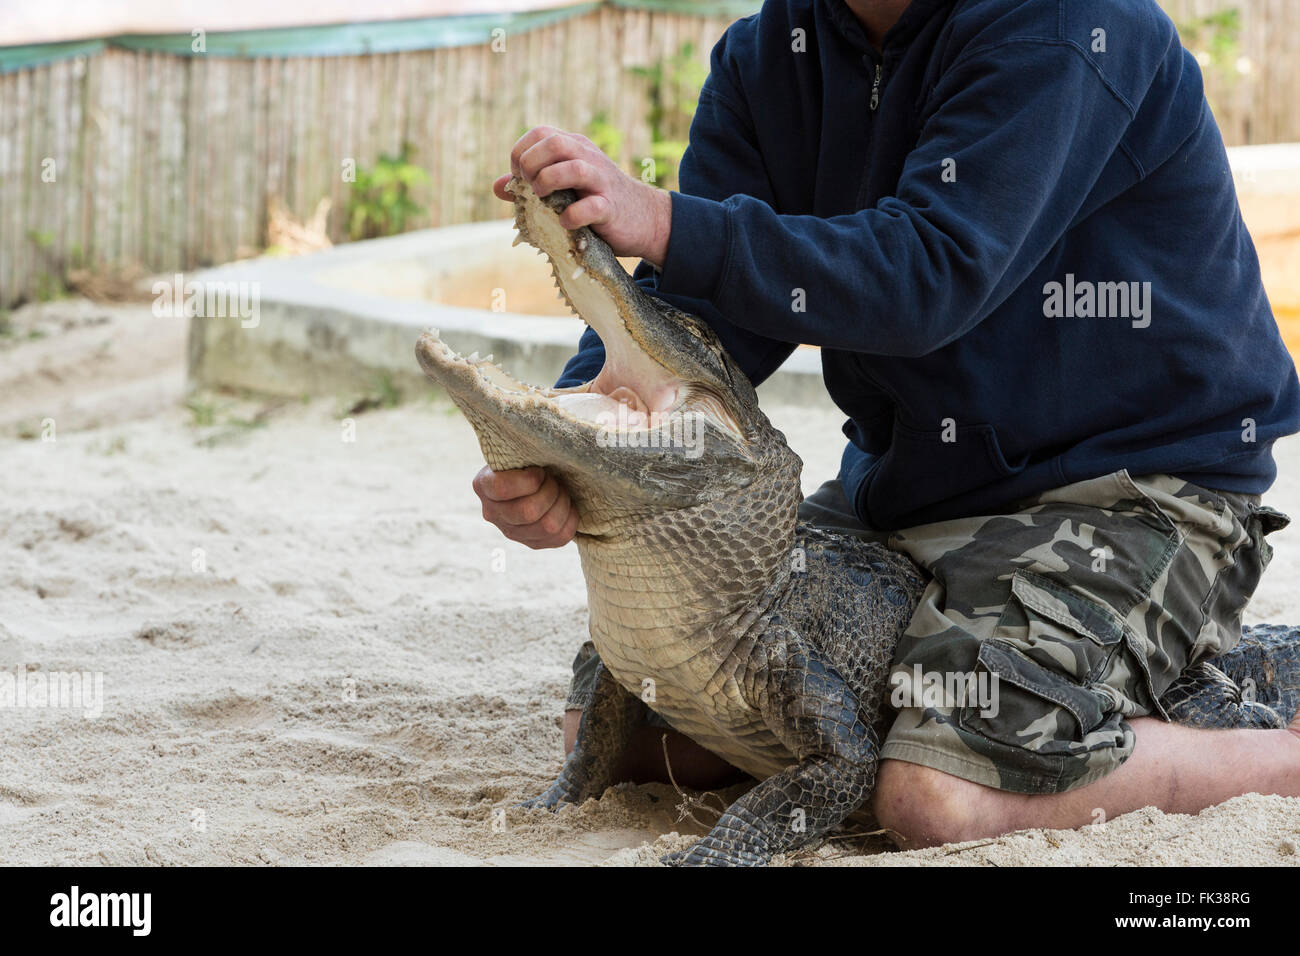 Person performing a performace with alligator in the Florida Everglades. Stock Photo